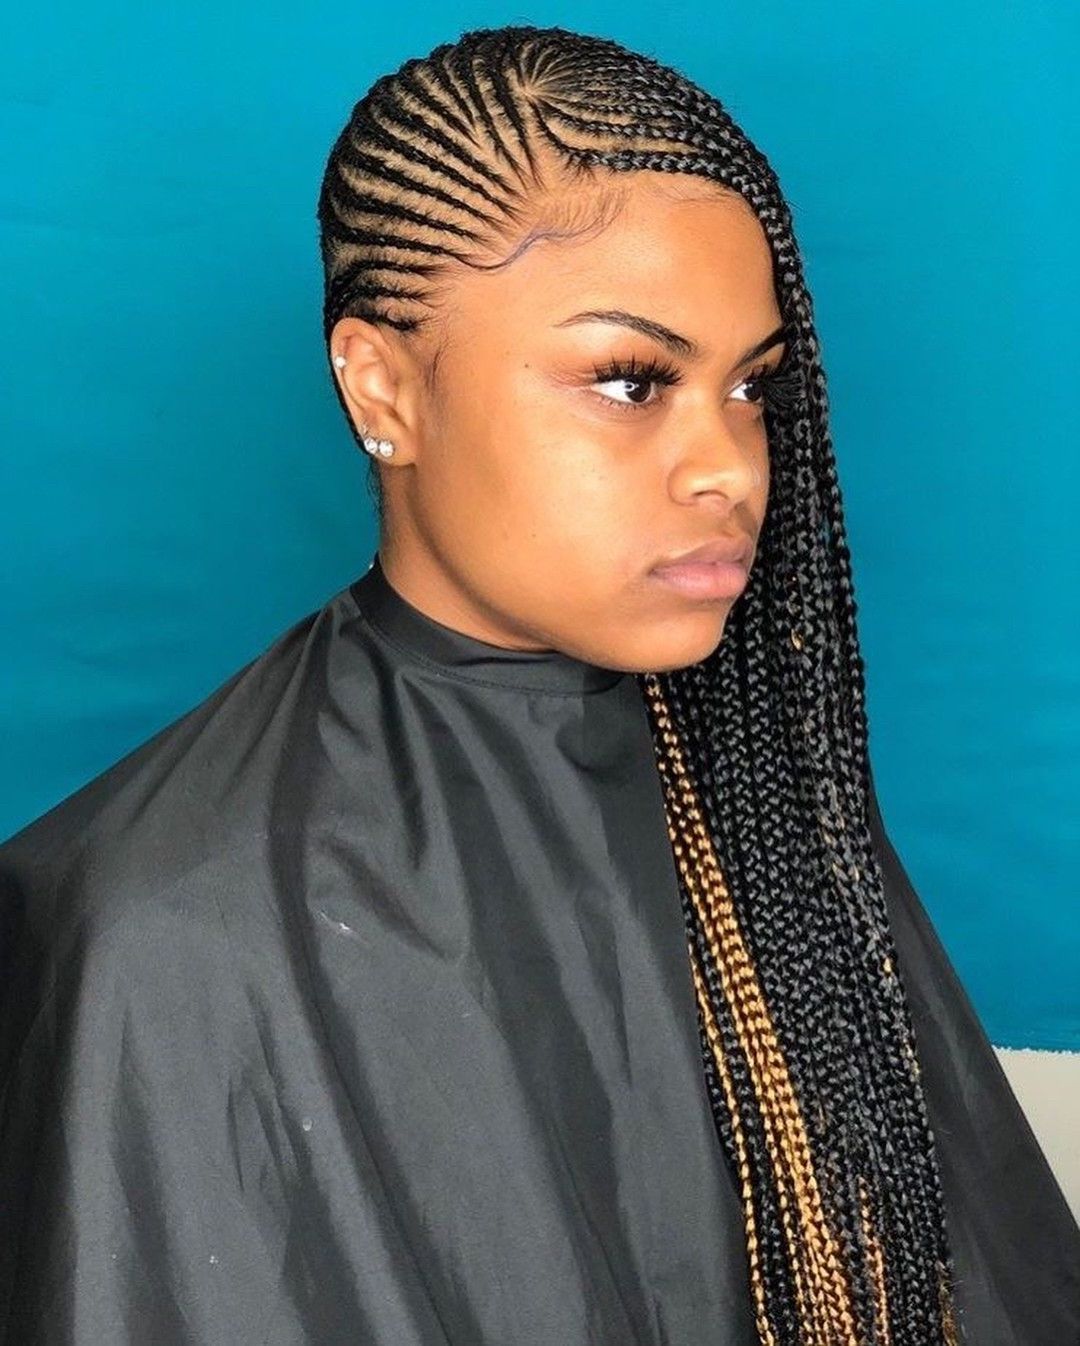 35 Lemonade Braids Styles For Elegant Protective Styling With Regard To Most Popular Golden Blonde Tiny Braid Hairstyles (View 13 of 20)